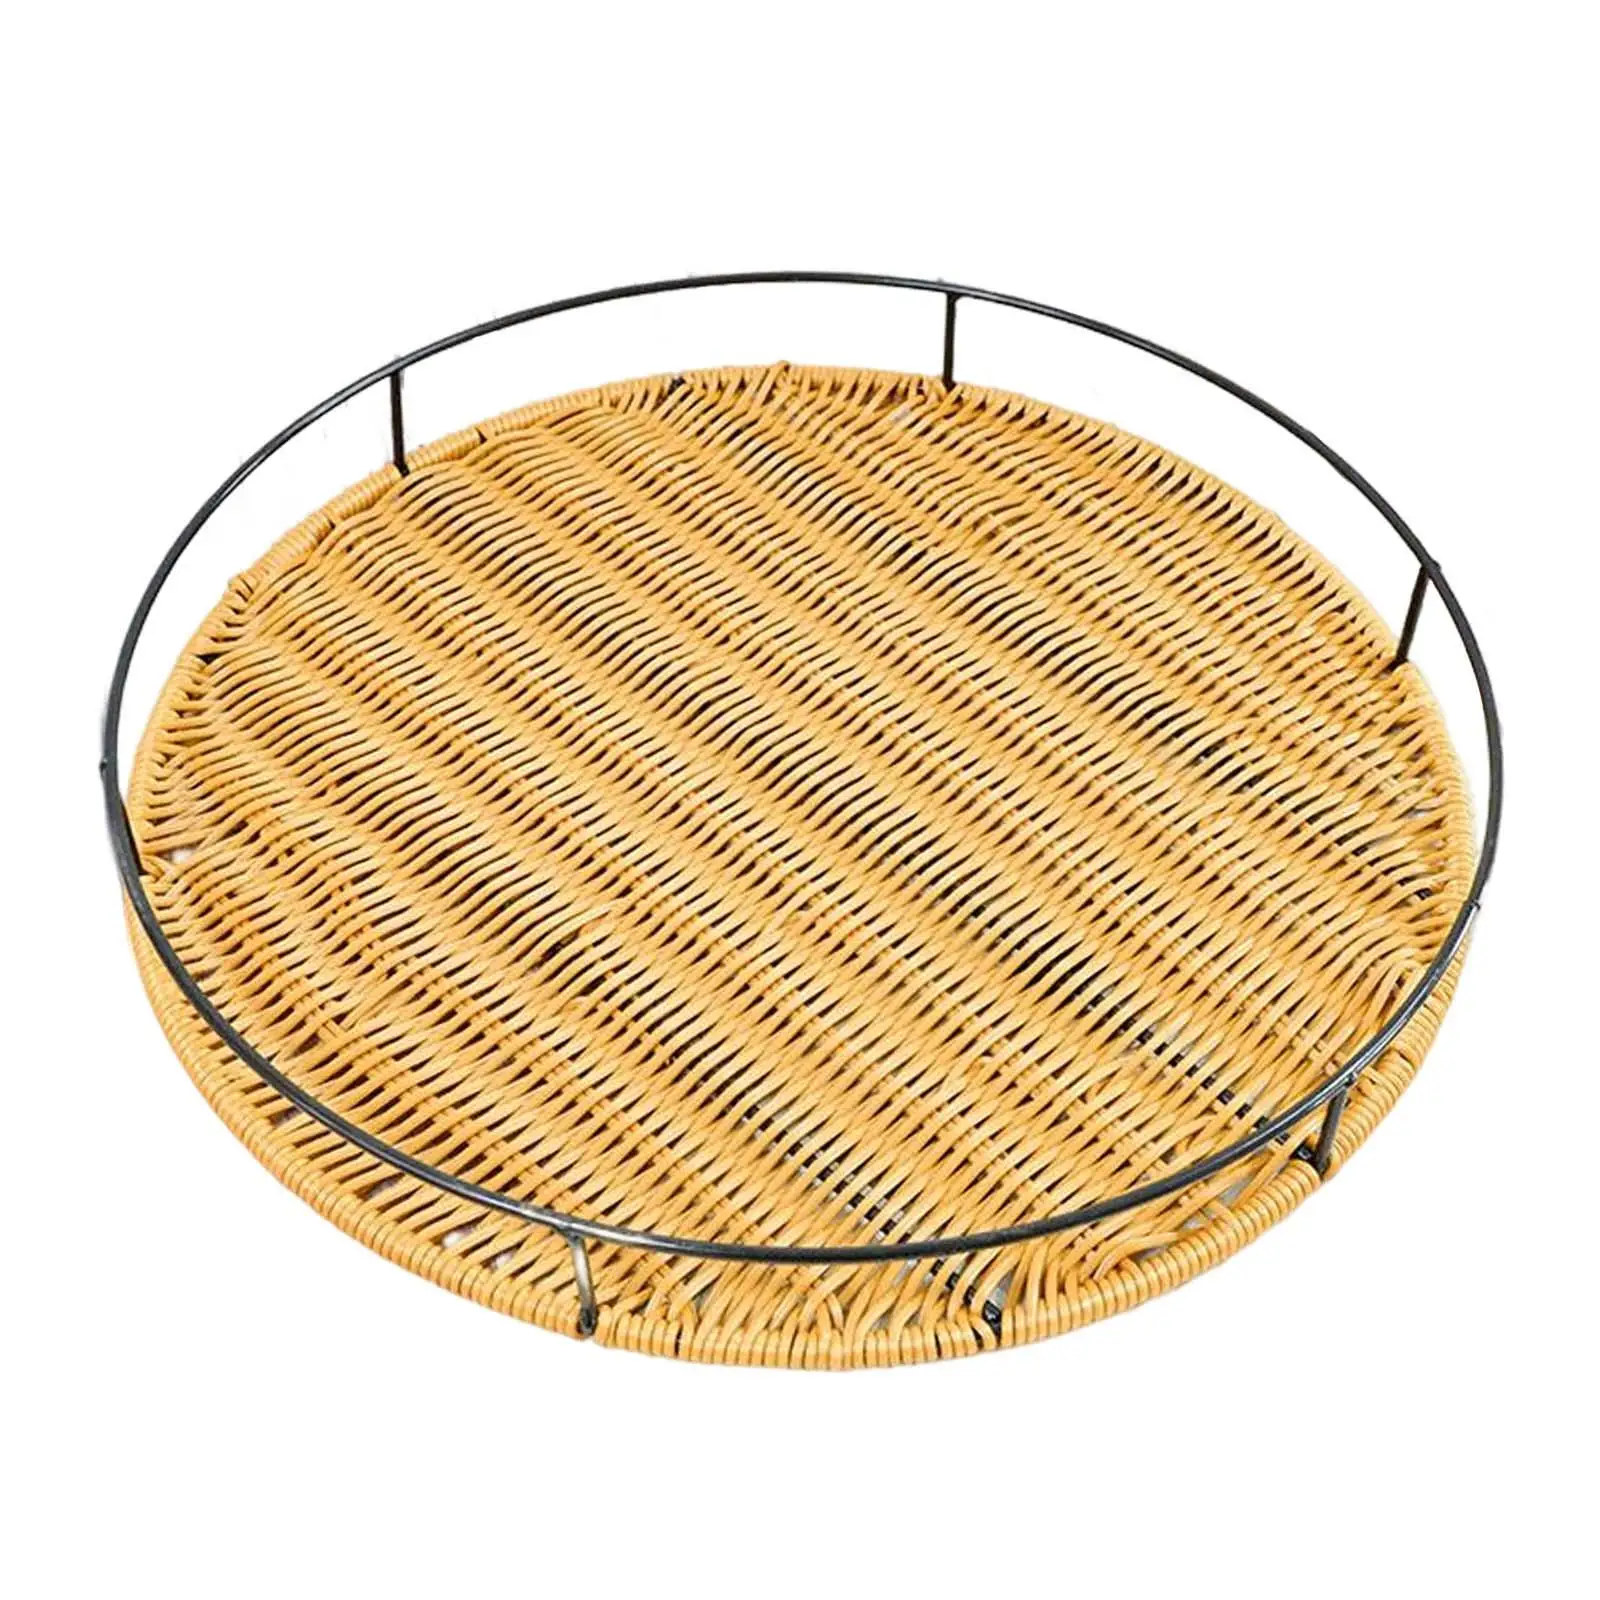 Hand Woven Serving Tray Fruit Storage Organizer Home Decor Handmade Woven Bread Basket for Drinks Snack Vegetables dining